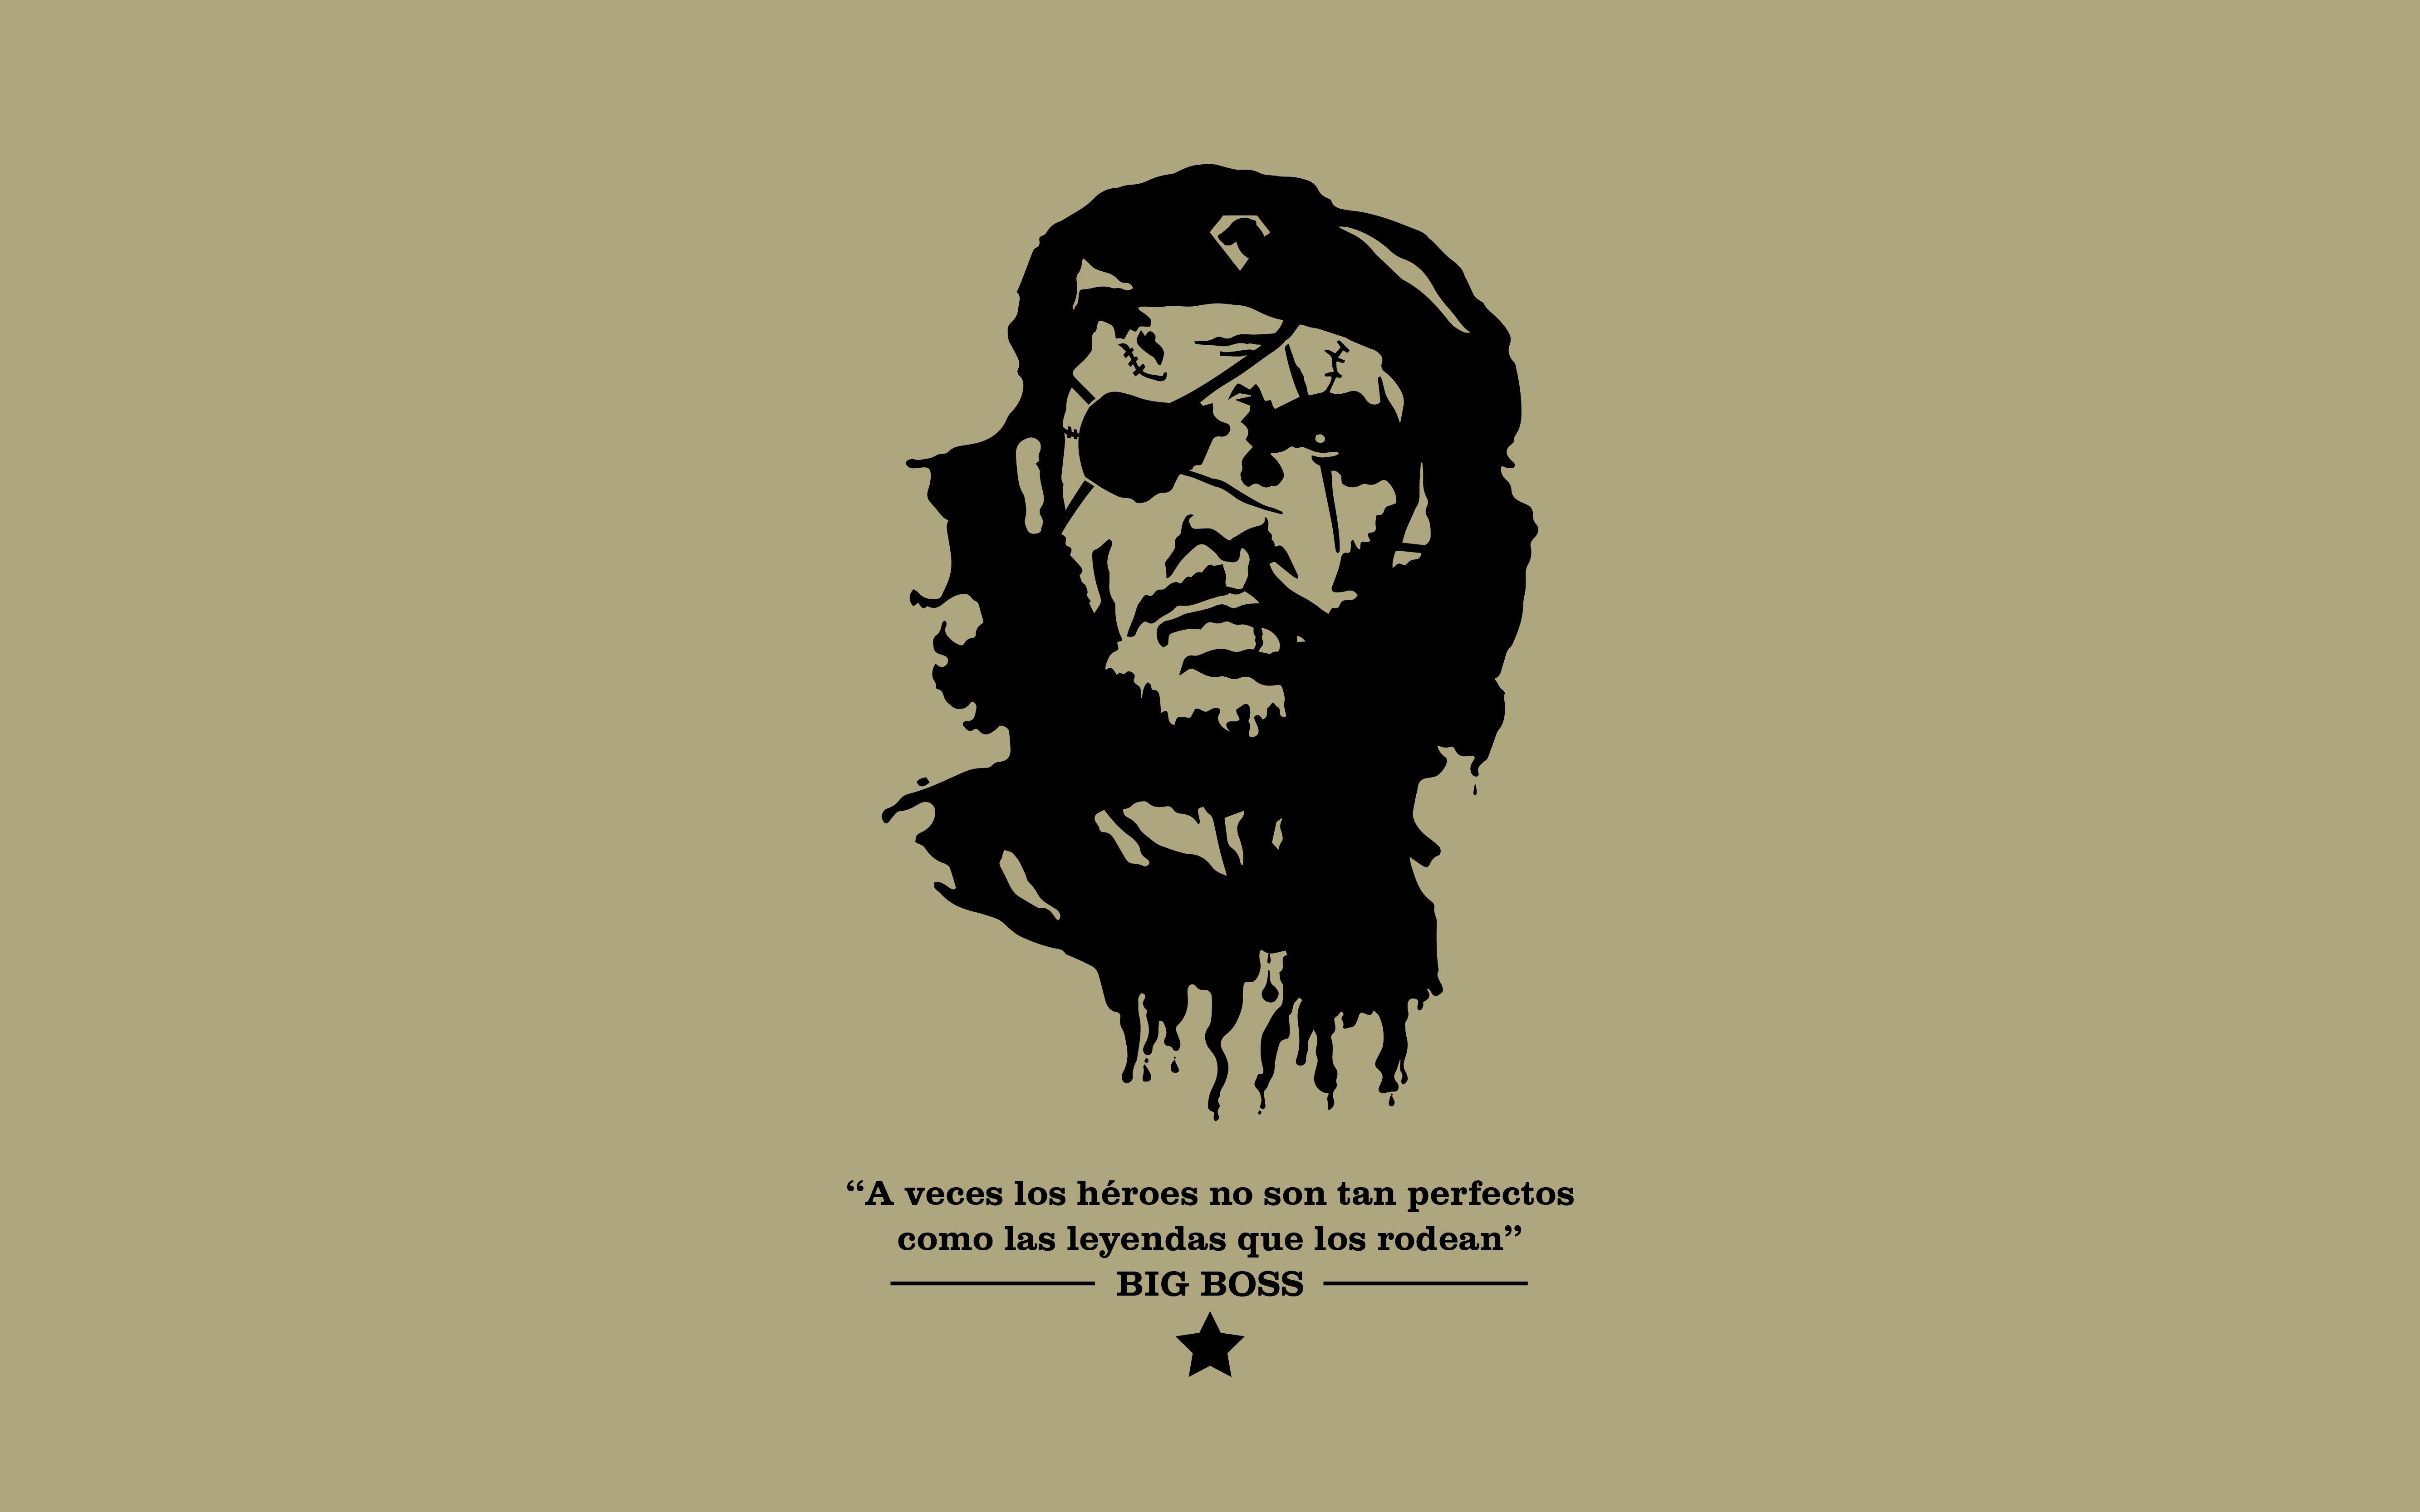 Che guevara wallpaper poster for home decoration 12 X 18 Inches Paper Print   Decorative posters in India  Buy art film design movie music nature  and educational paintingswallpapers at Flipkartcom